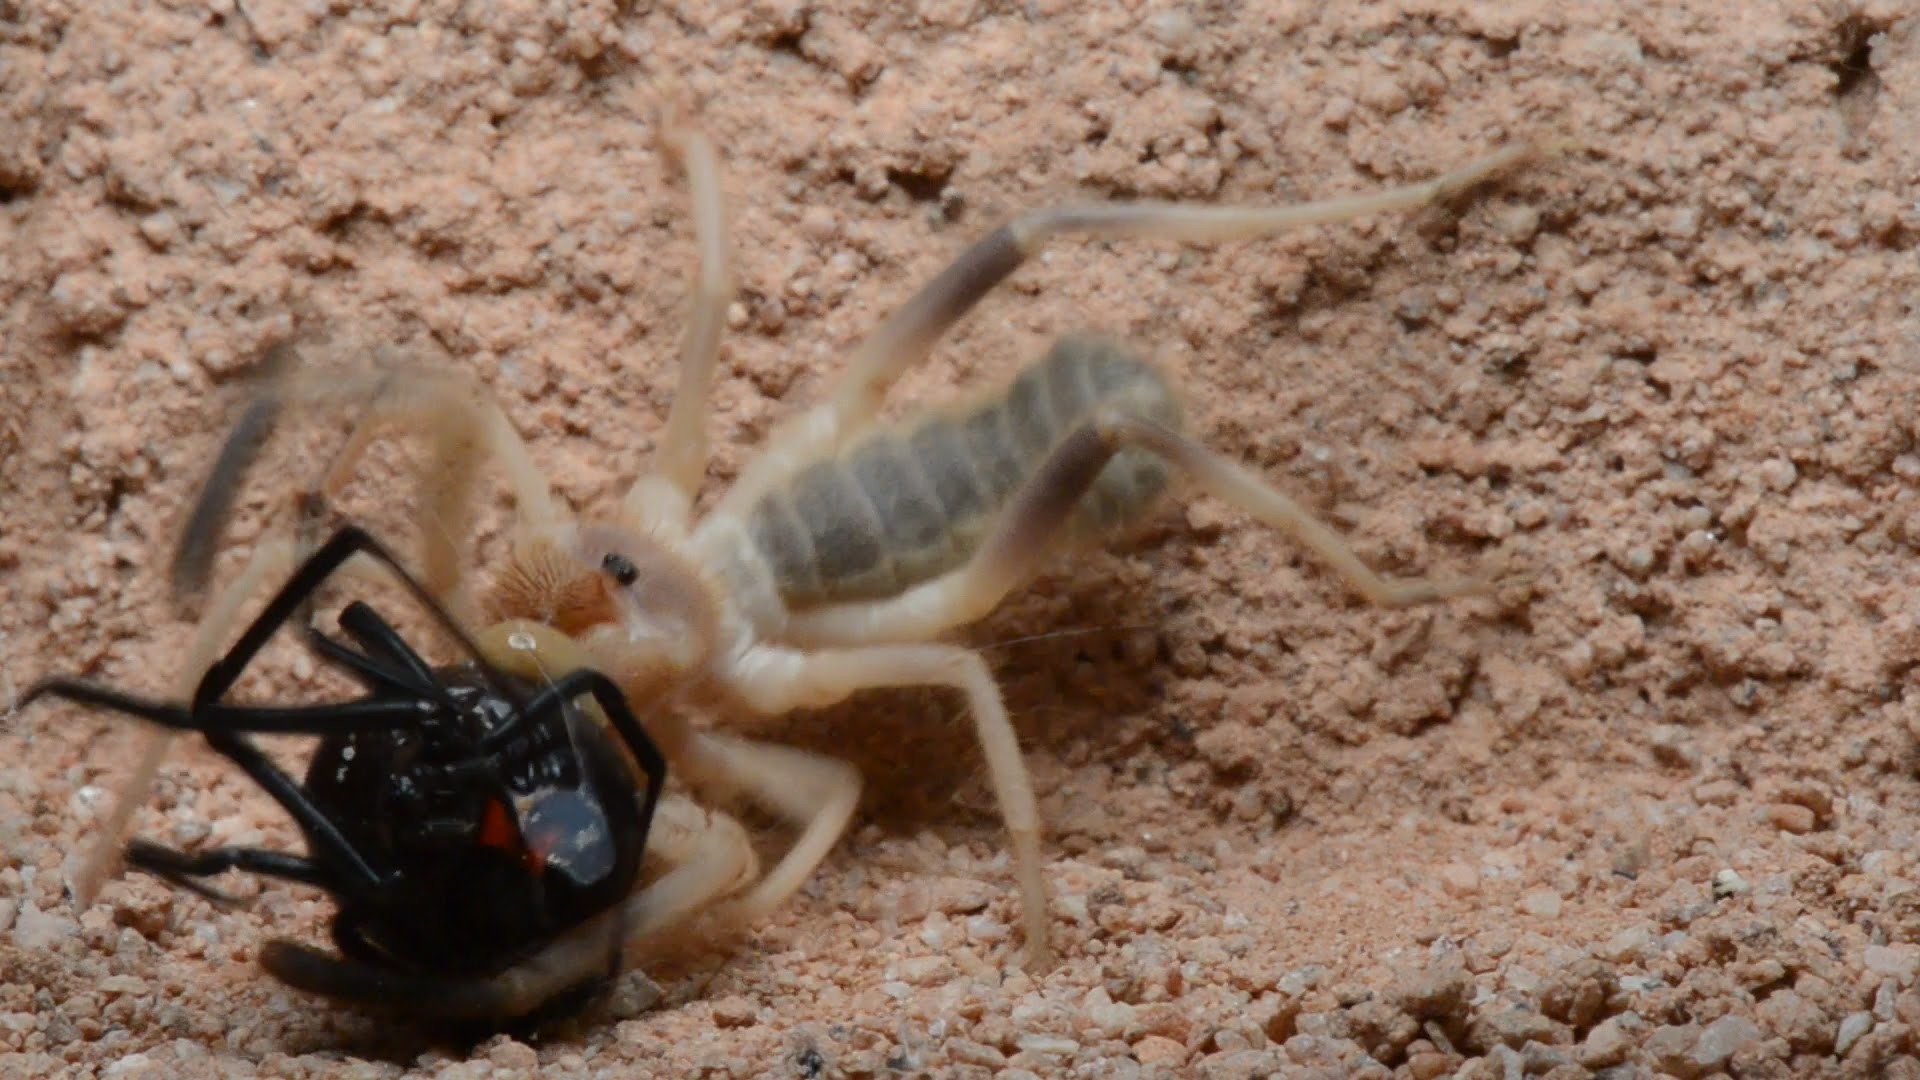 1920x1080 Camel Spider Captures And Preys On Black Widow (Warning: May be disturbing  to many viewers.) - YouTube